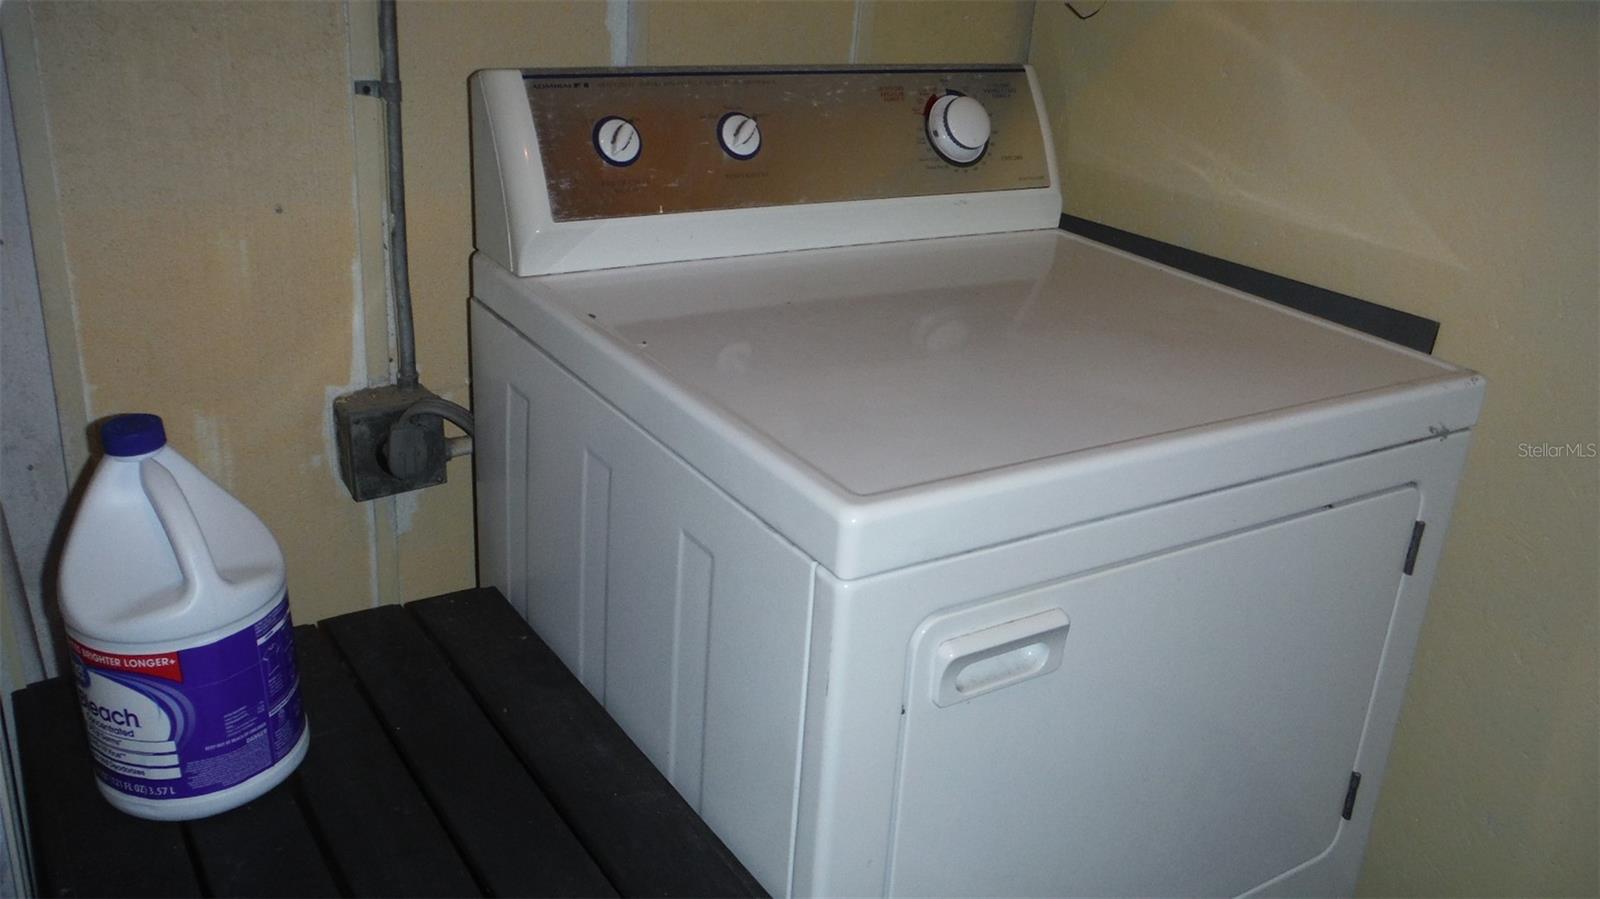 Shed has Washer & Dryer